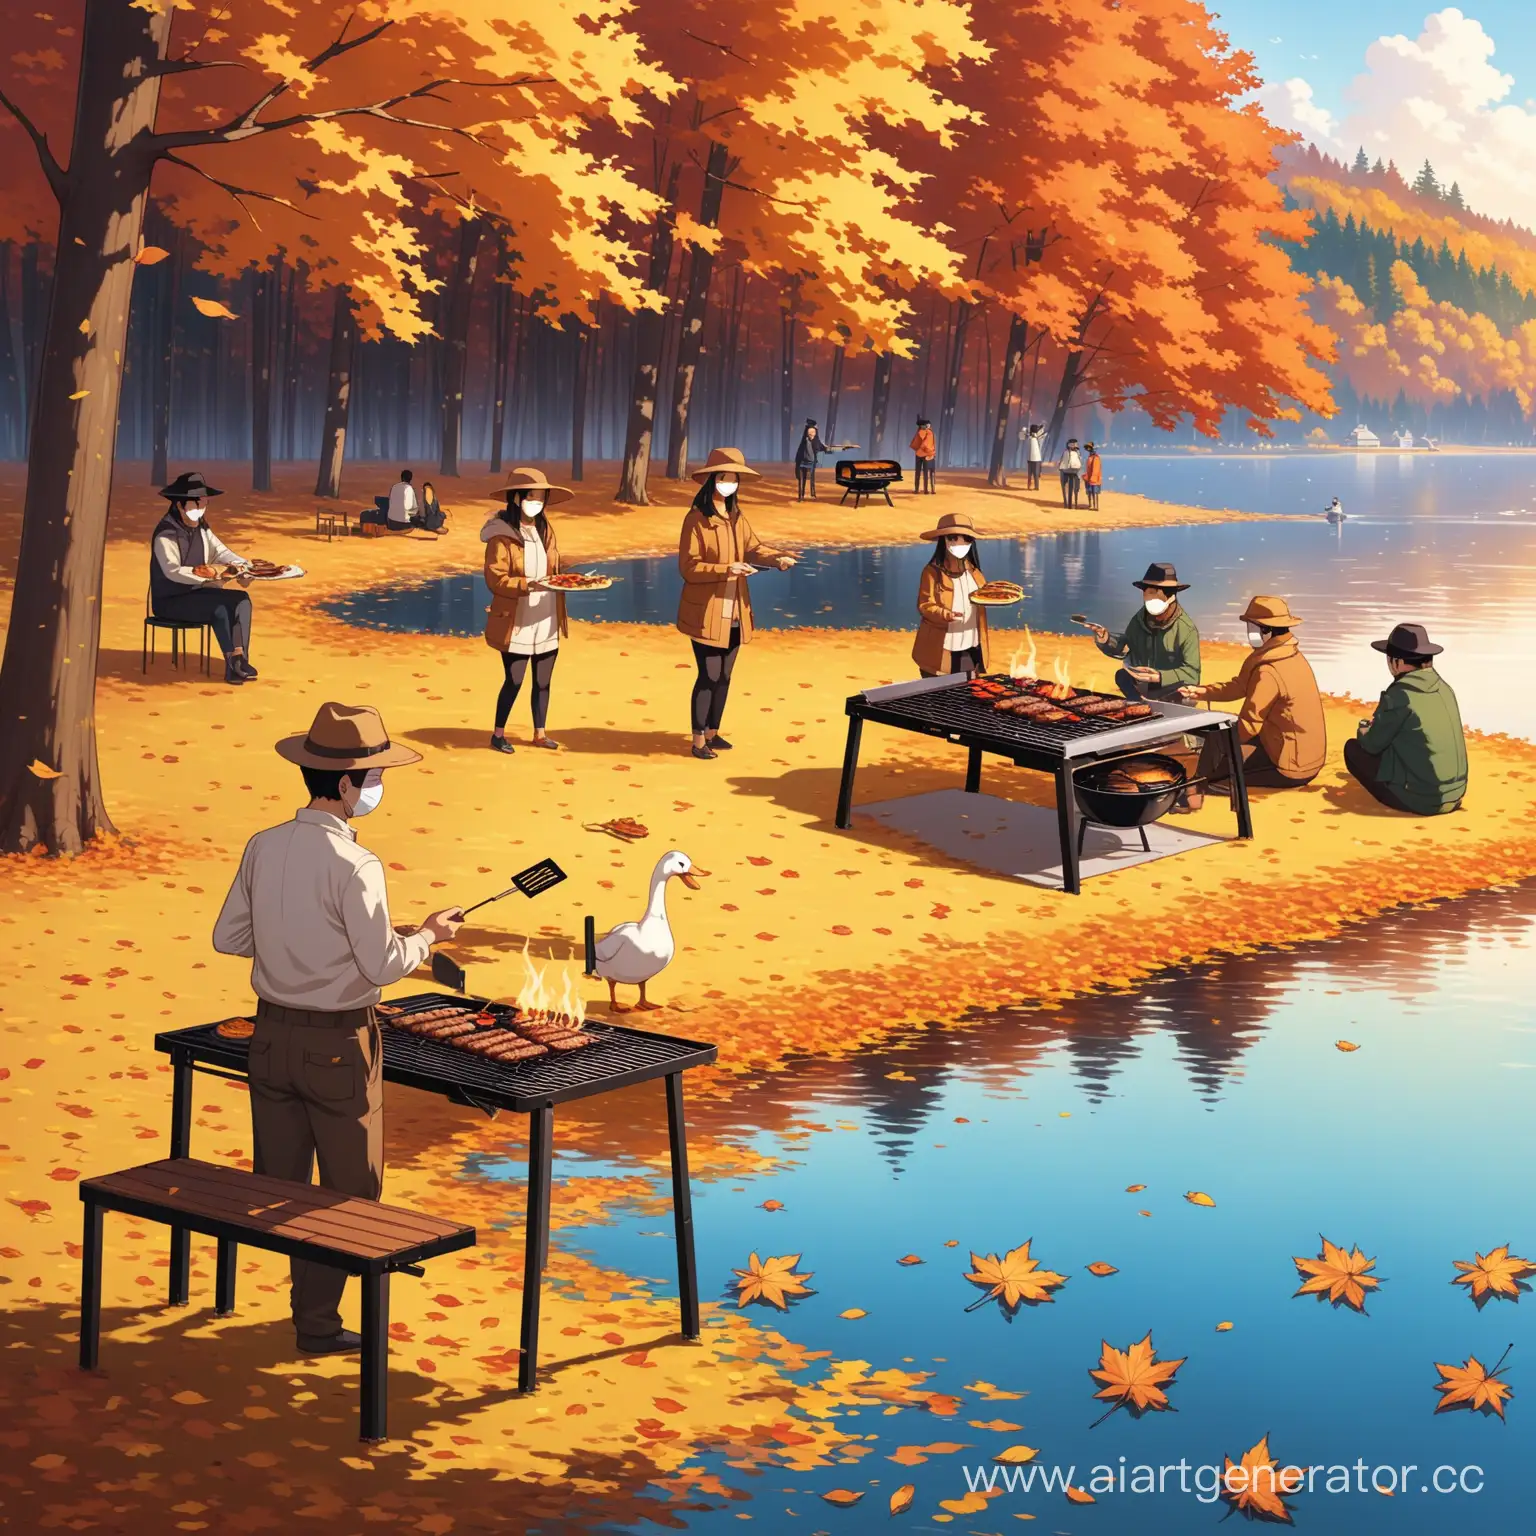 Autumn-Lakeside-BBQ-Gathering-Around-the-Grill-with-Friends-and-Nature